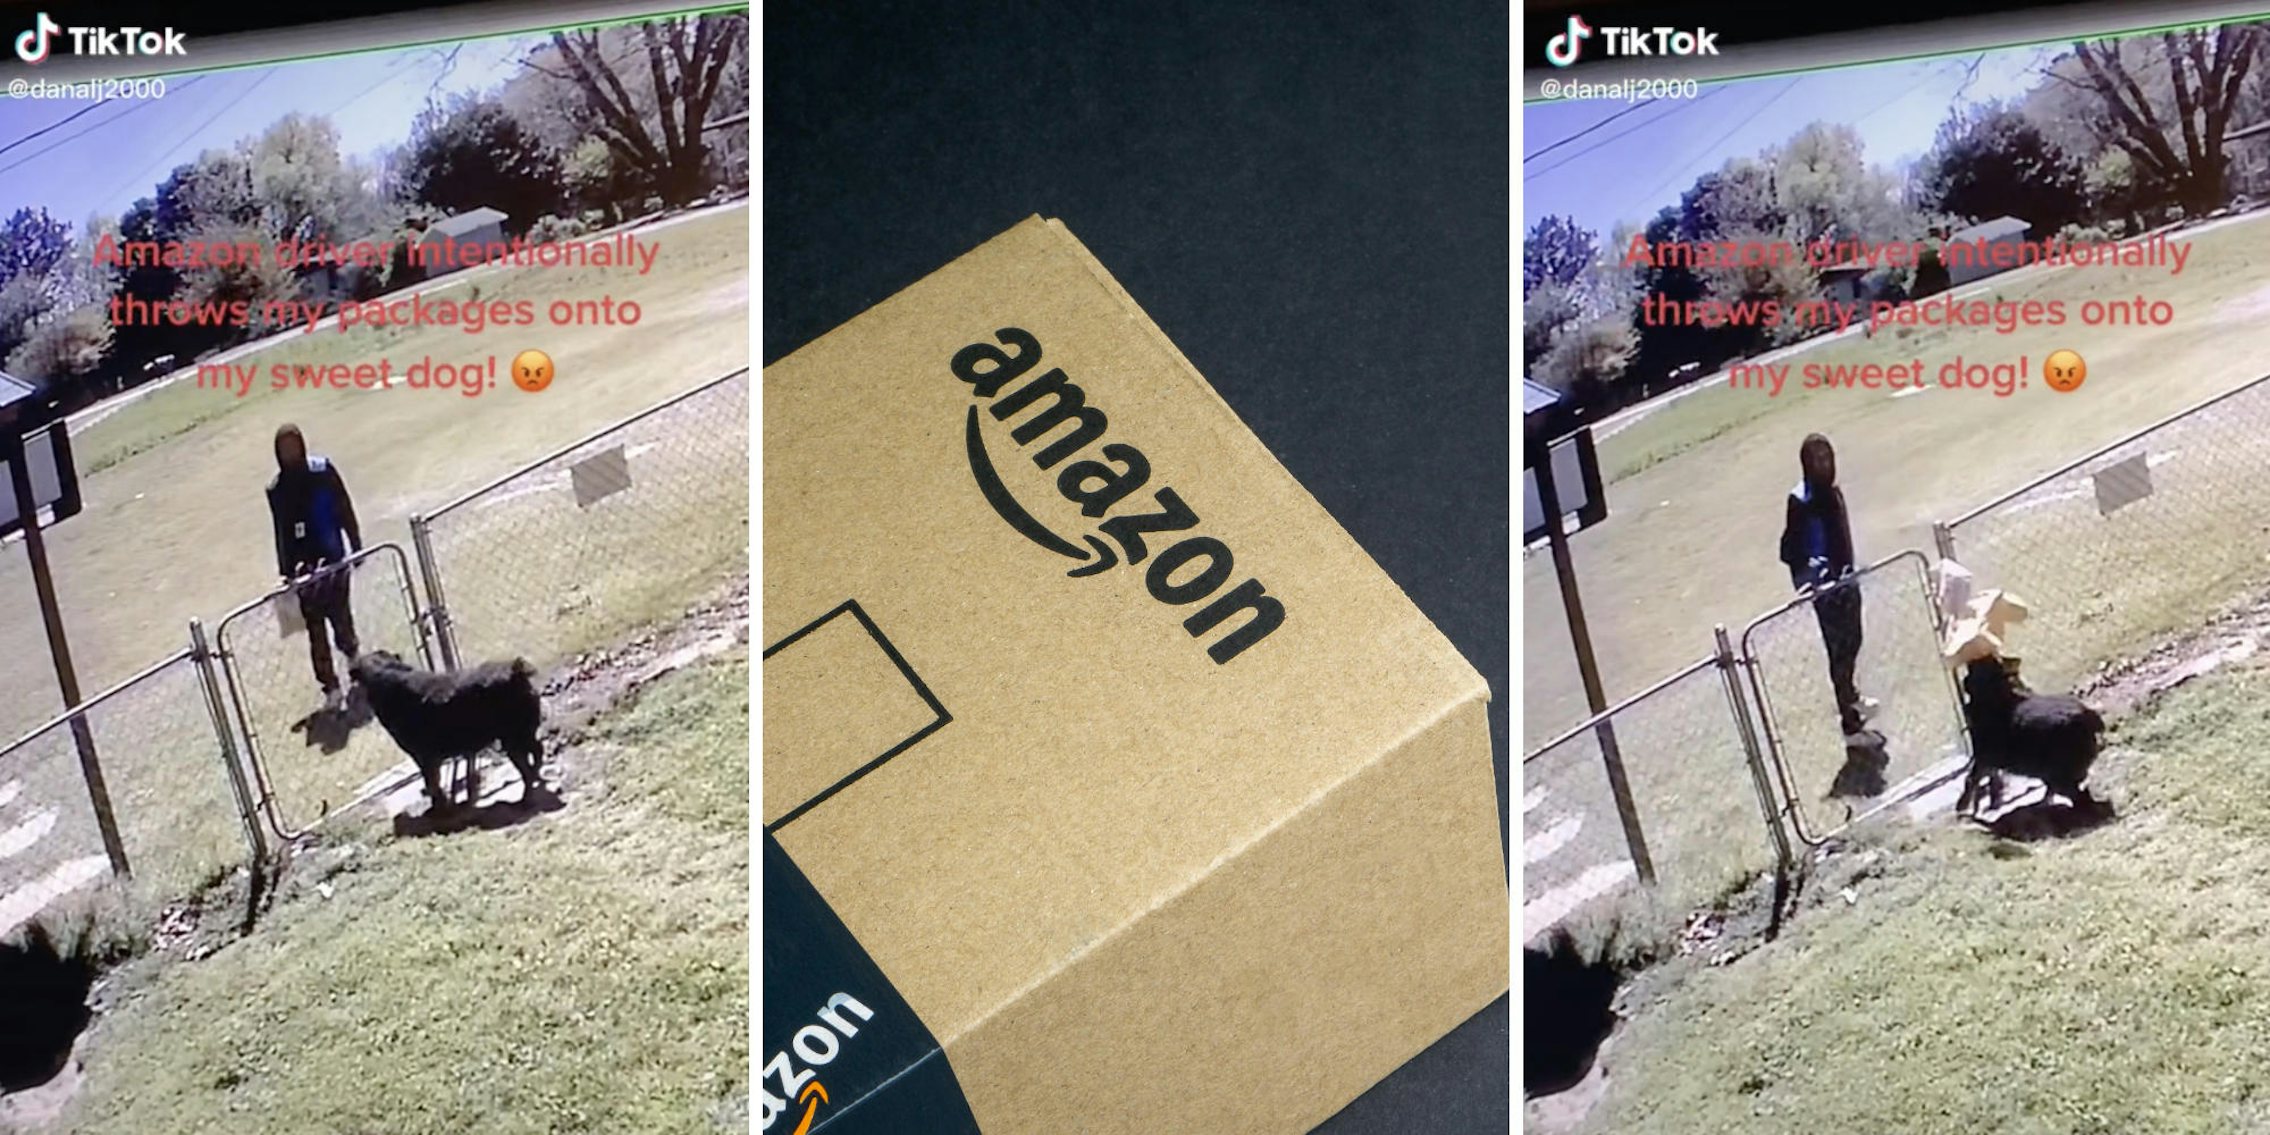 amazong worker walking towards yard (l) amazon box (m) amazon worker throwing packages on dog (r)